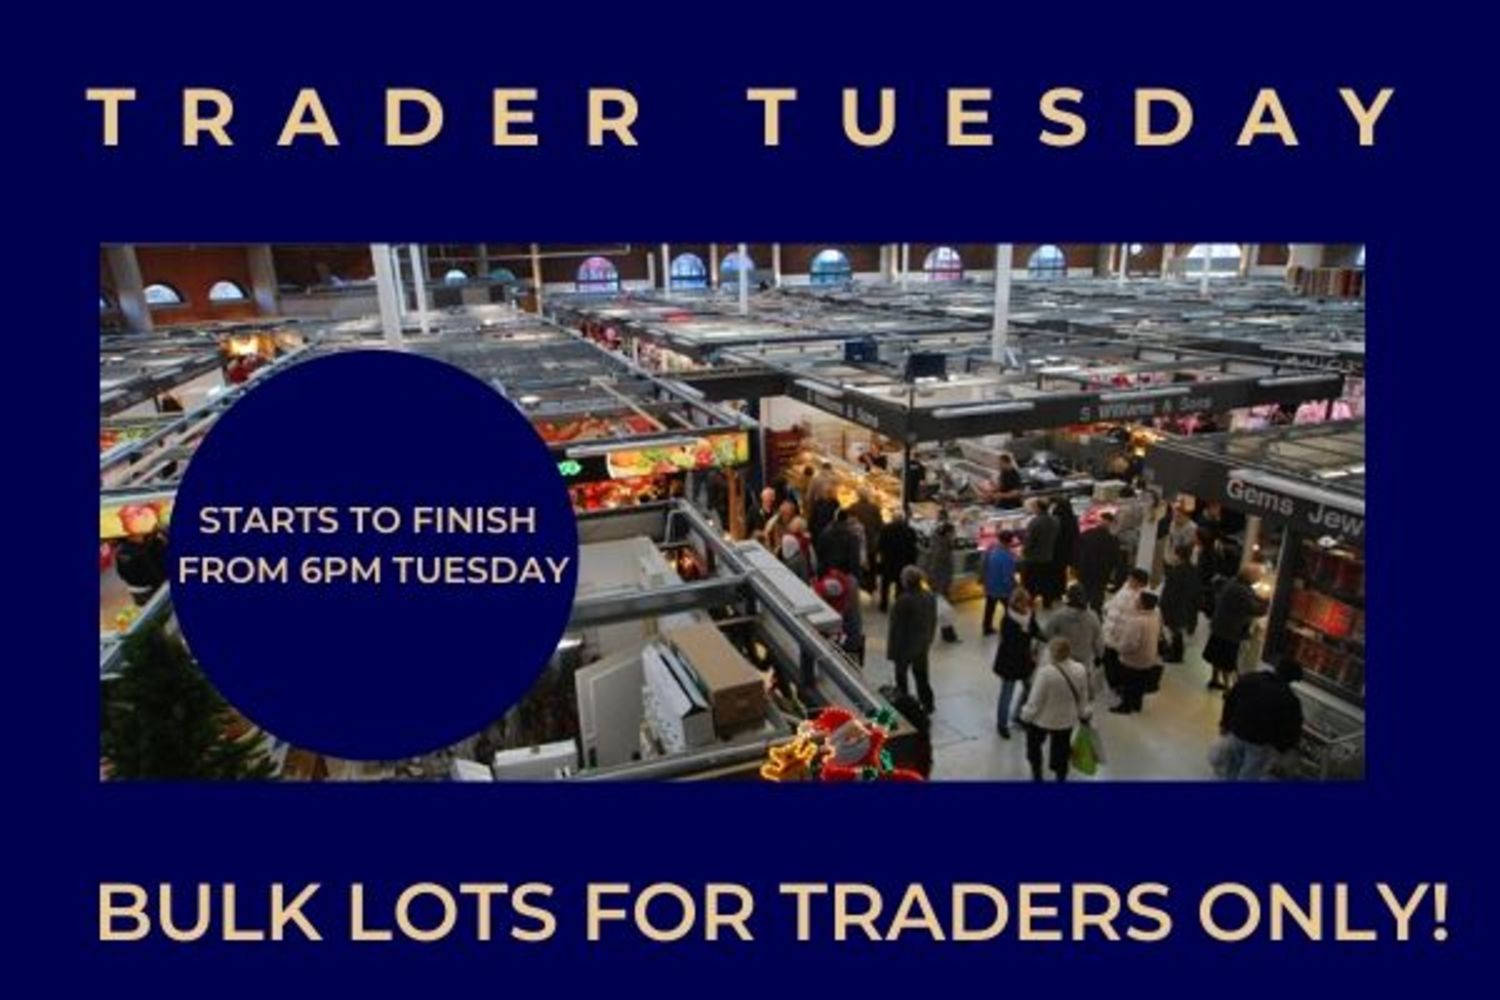 Trader Tuesday - Bulk Lots For Traders Only